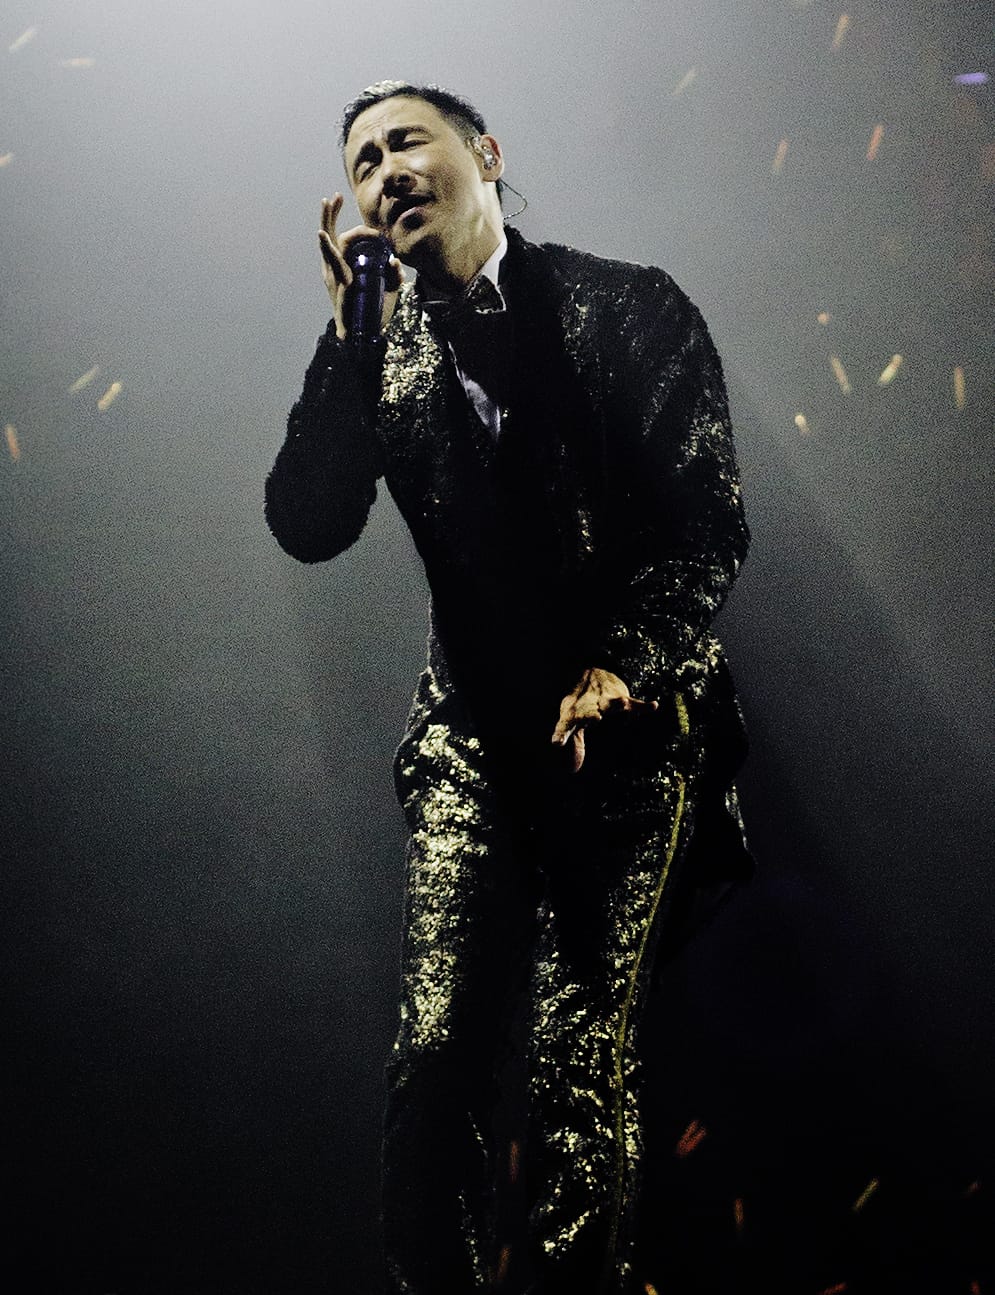 Jacky Cheung on Stage in 2018 cropped